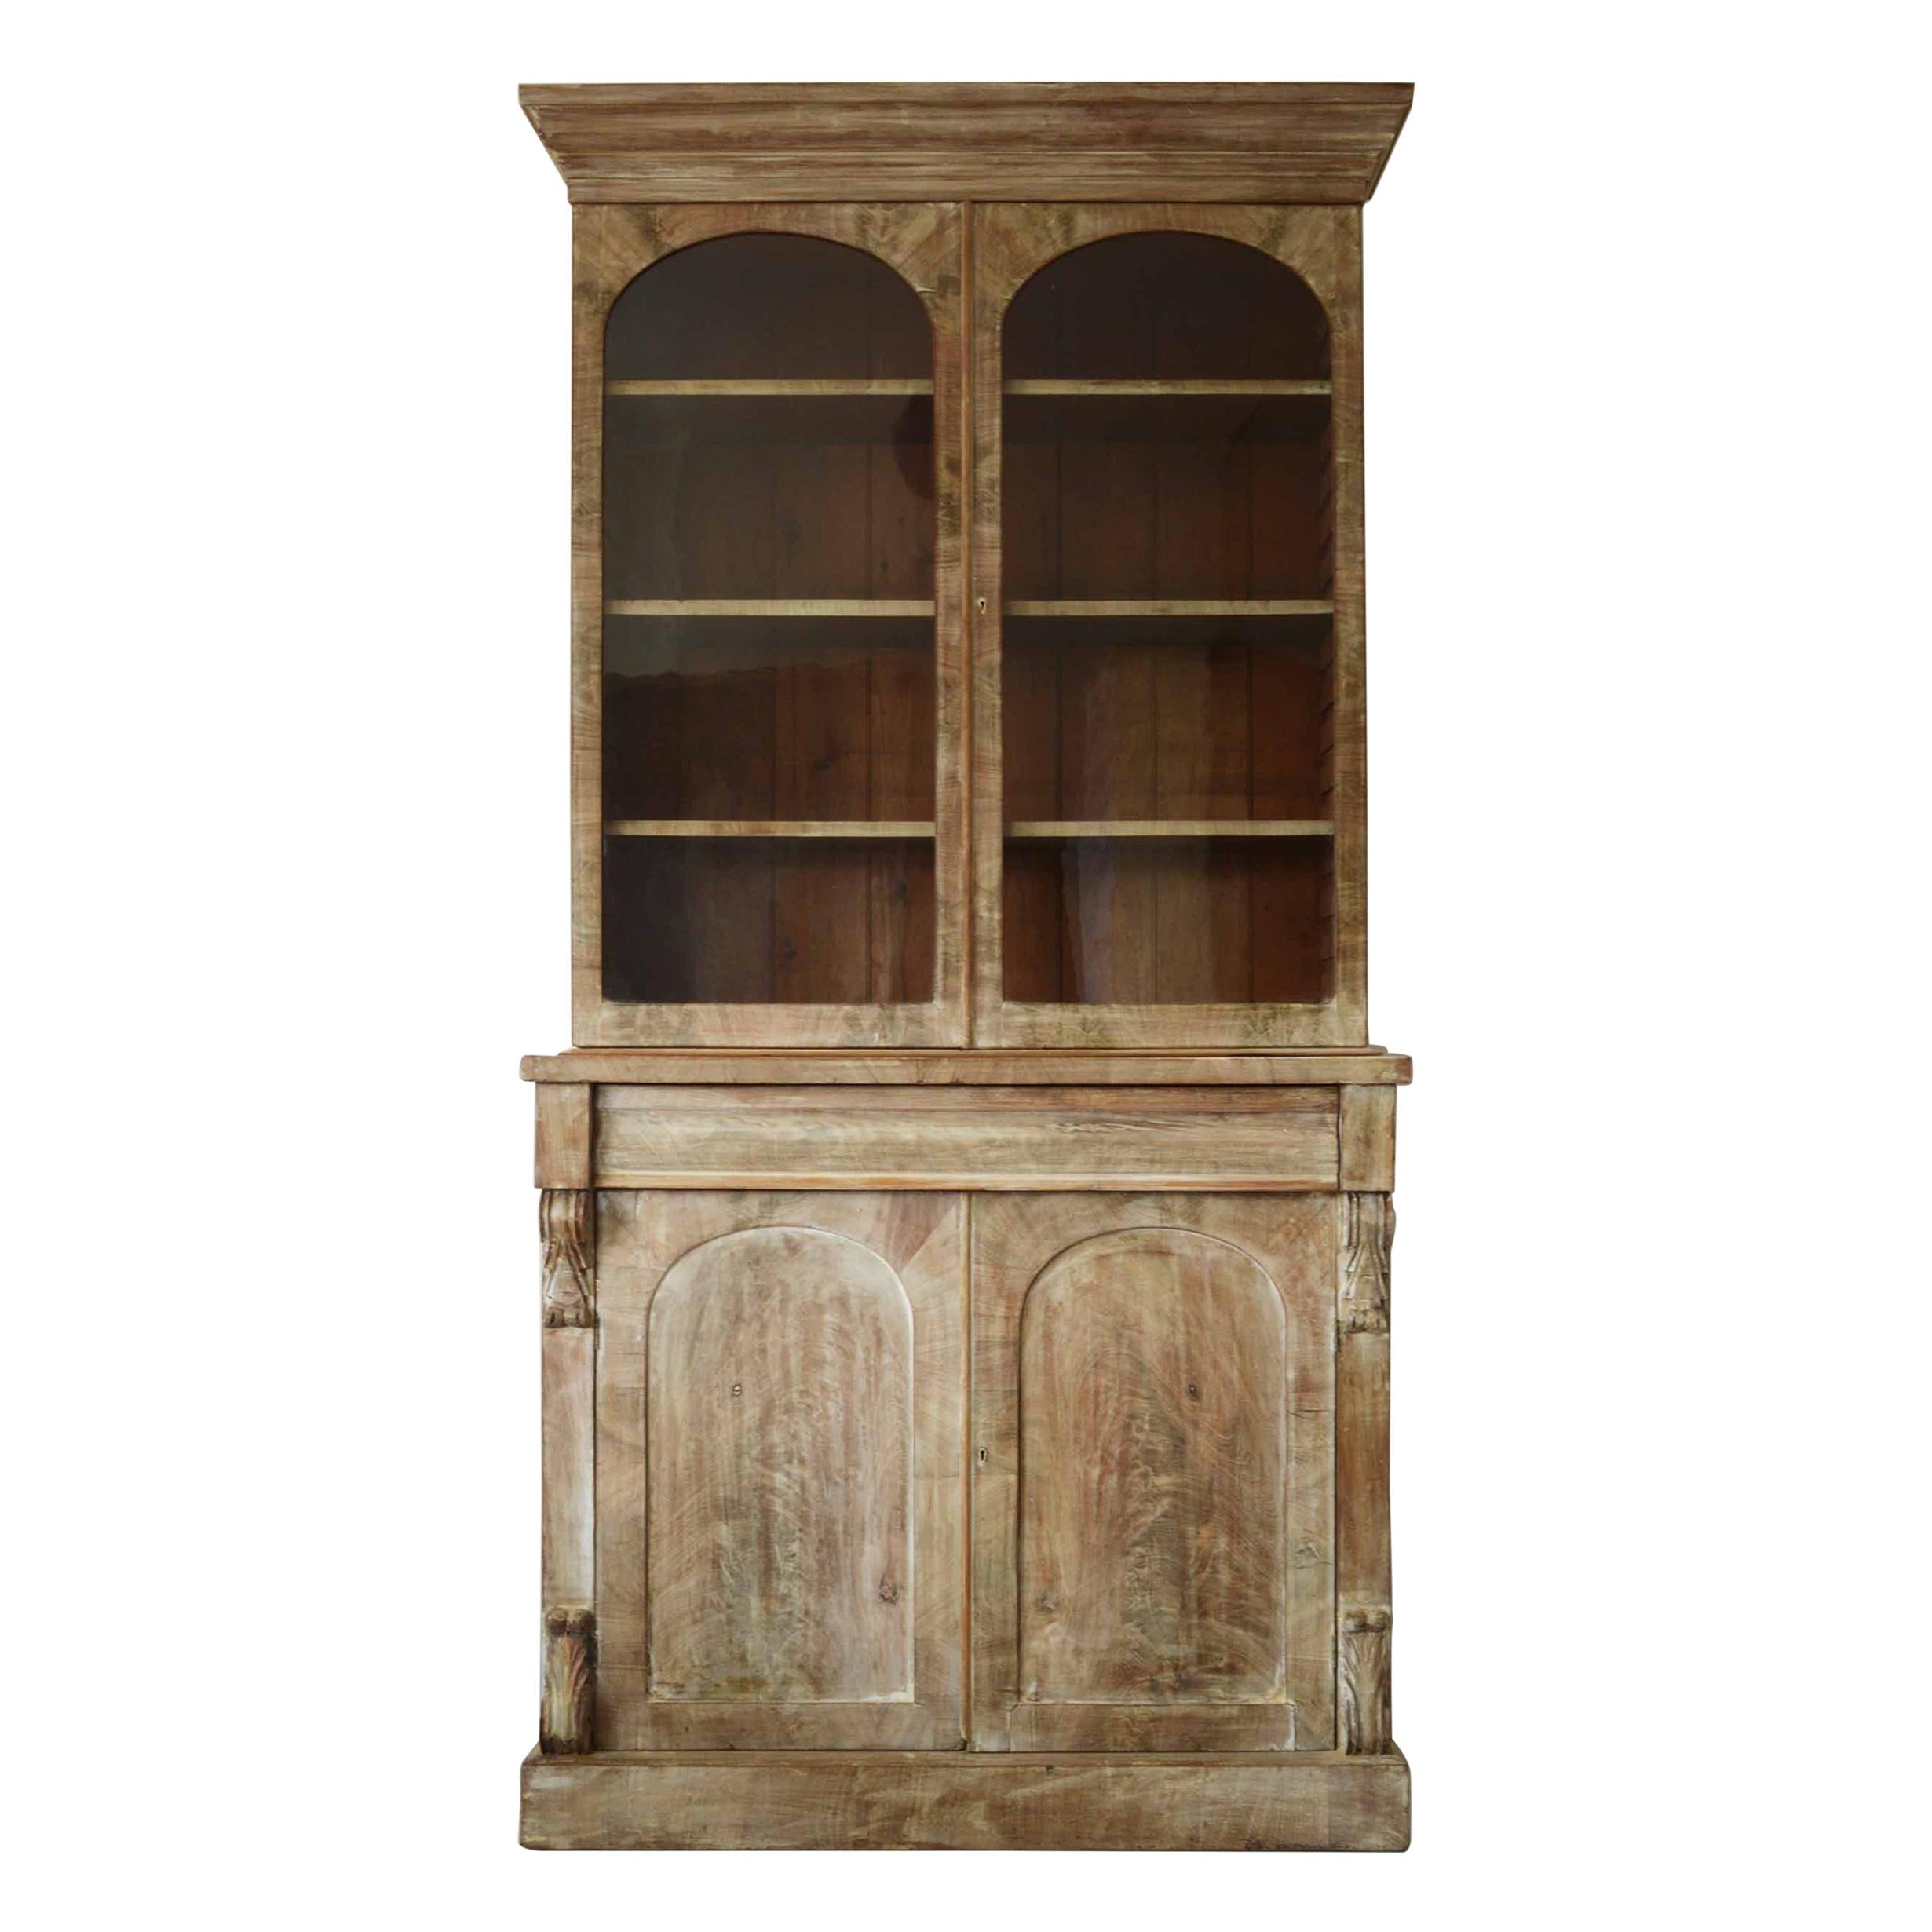 Antique Bleached Mahogany Arched Door Glazed Cabinet